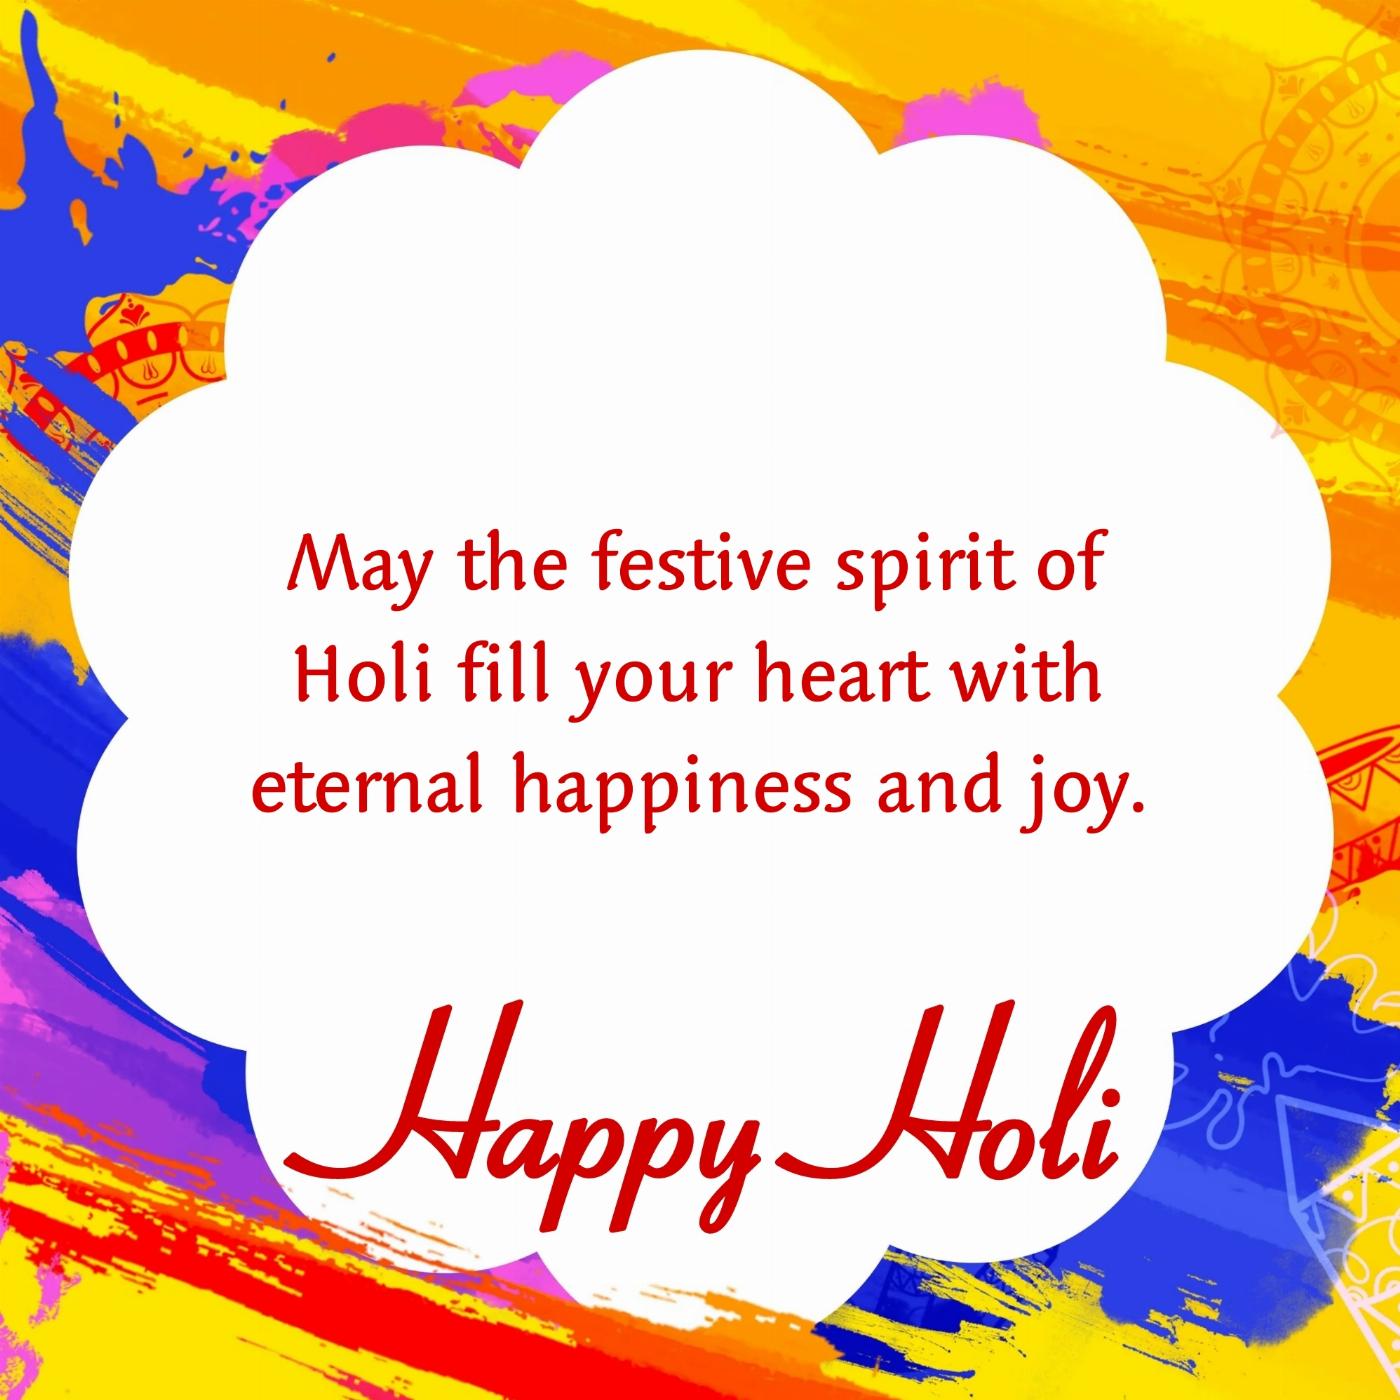 May the festive spirit of Holi fill your heart with eternal happiness